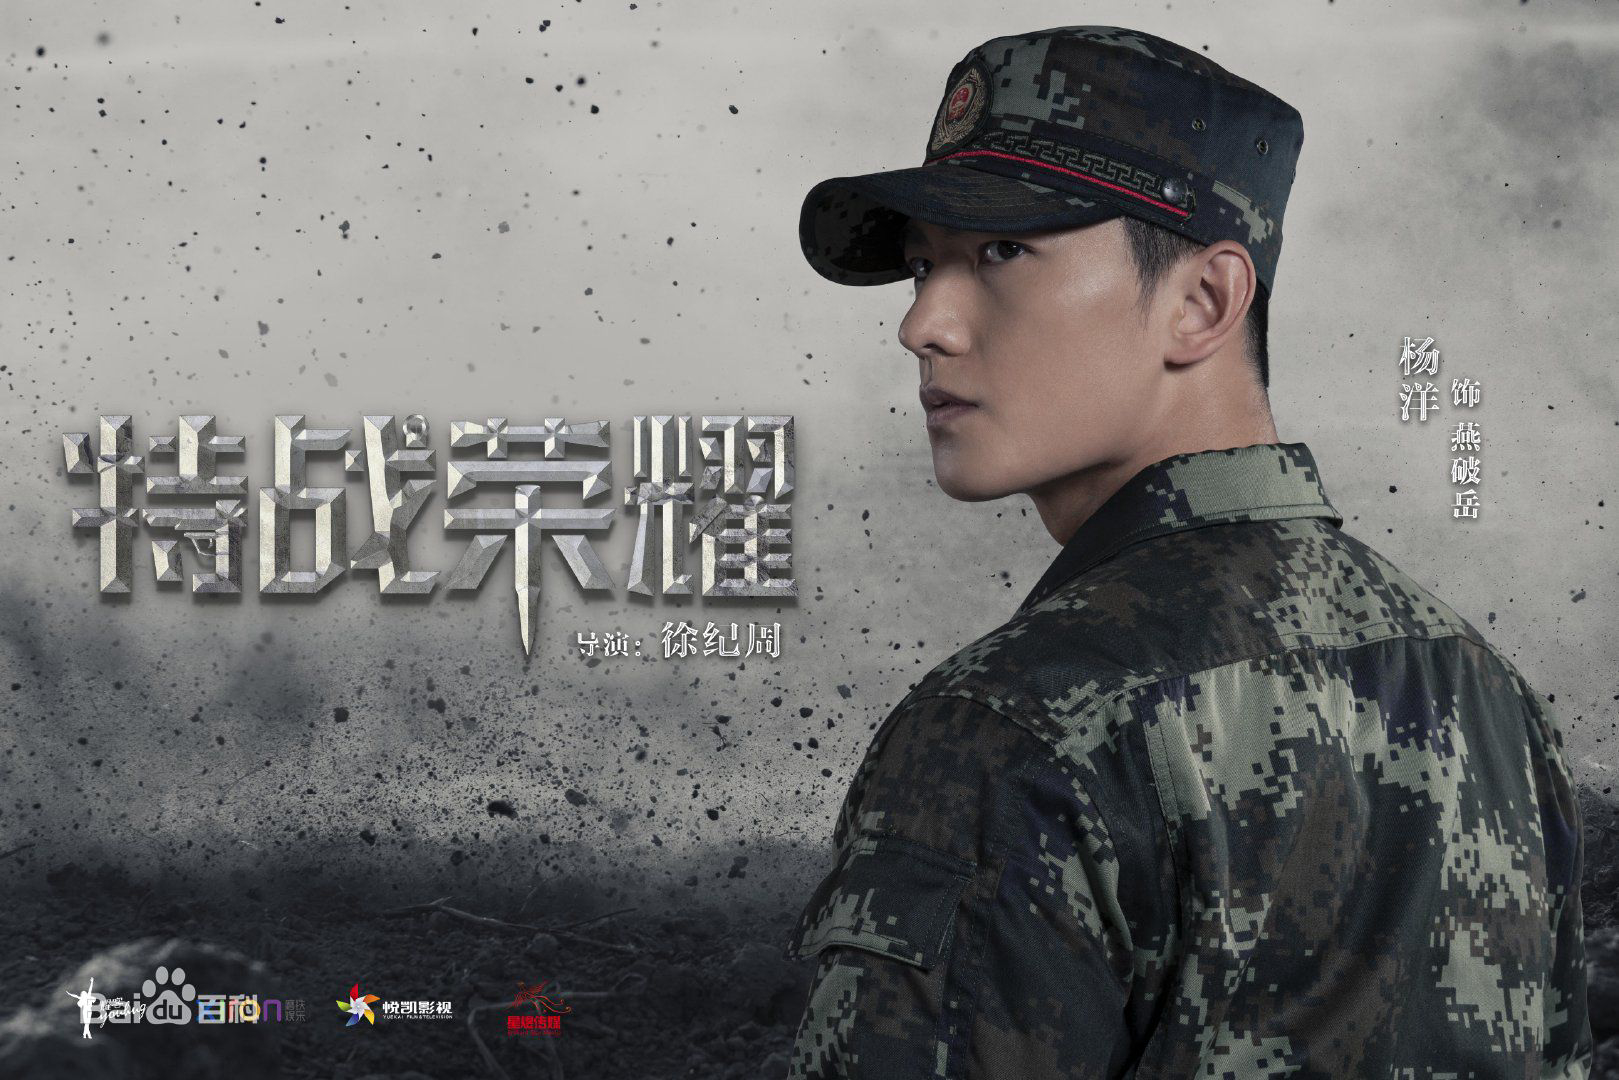 Banner Phim Đặc Chiến Vinh Diệu (Glory of Special Forces)